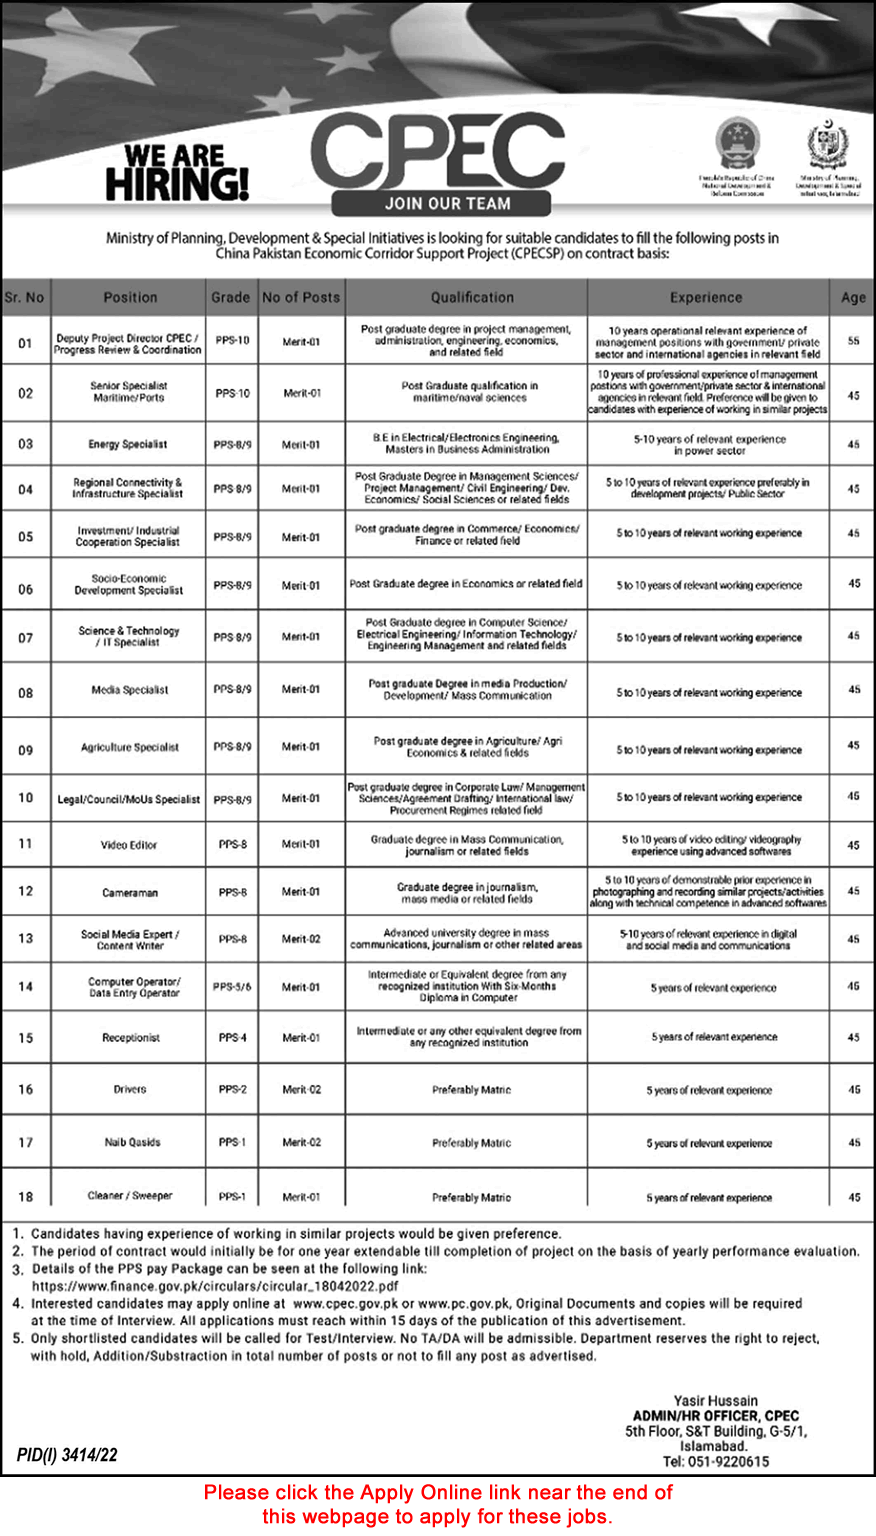 Ministry of Planning Development and Special Initiatives Jobs December 2022 CPEC Apply Online Latest